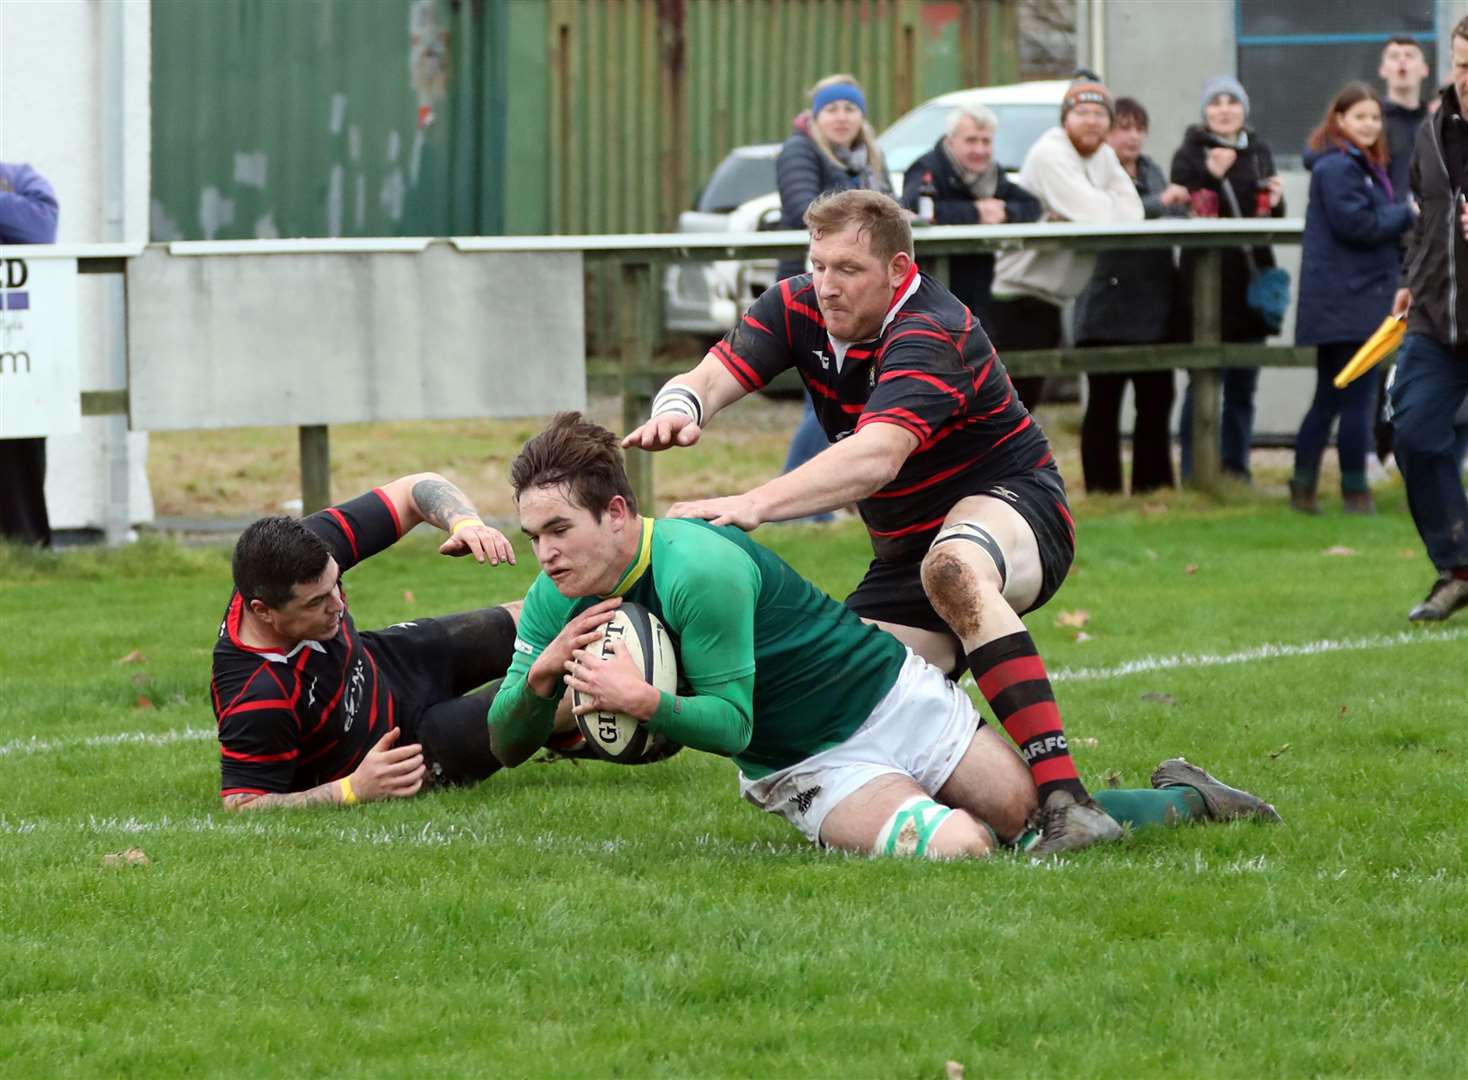 Max Kennedy got the first Caithness try against RAF Lossiemouth at the weekend. Picture: James Gunn